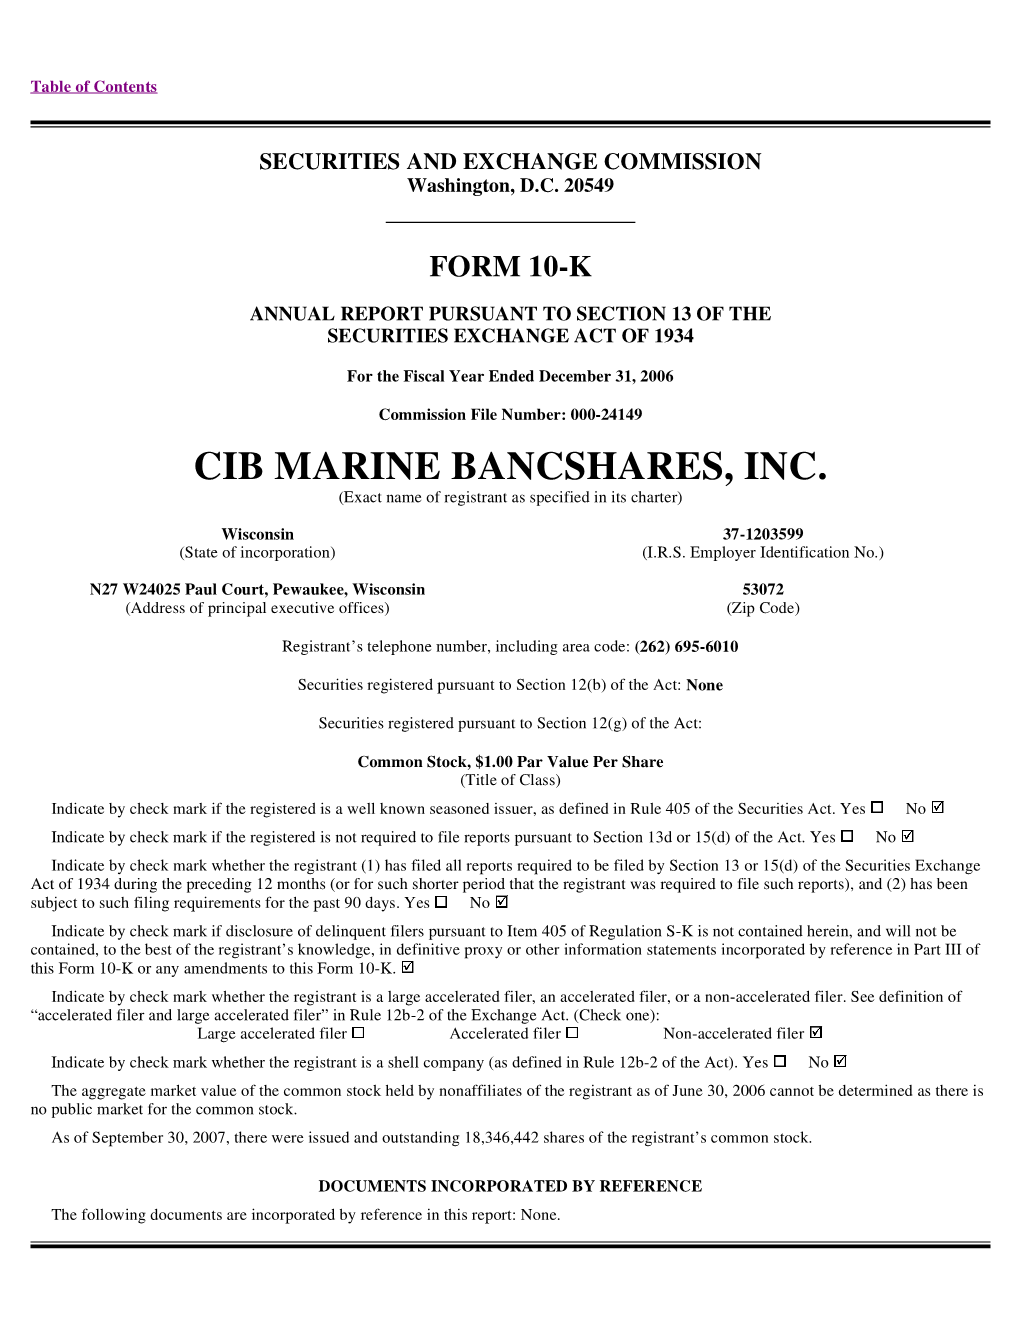 CIB MARINE BANCSHARES, INC. (Exact Name of Registrant As Specified in Its Charter)